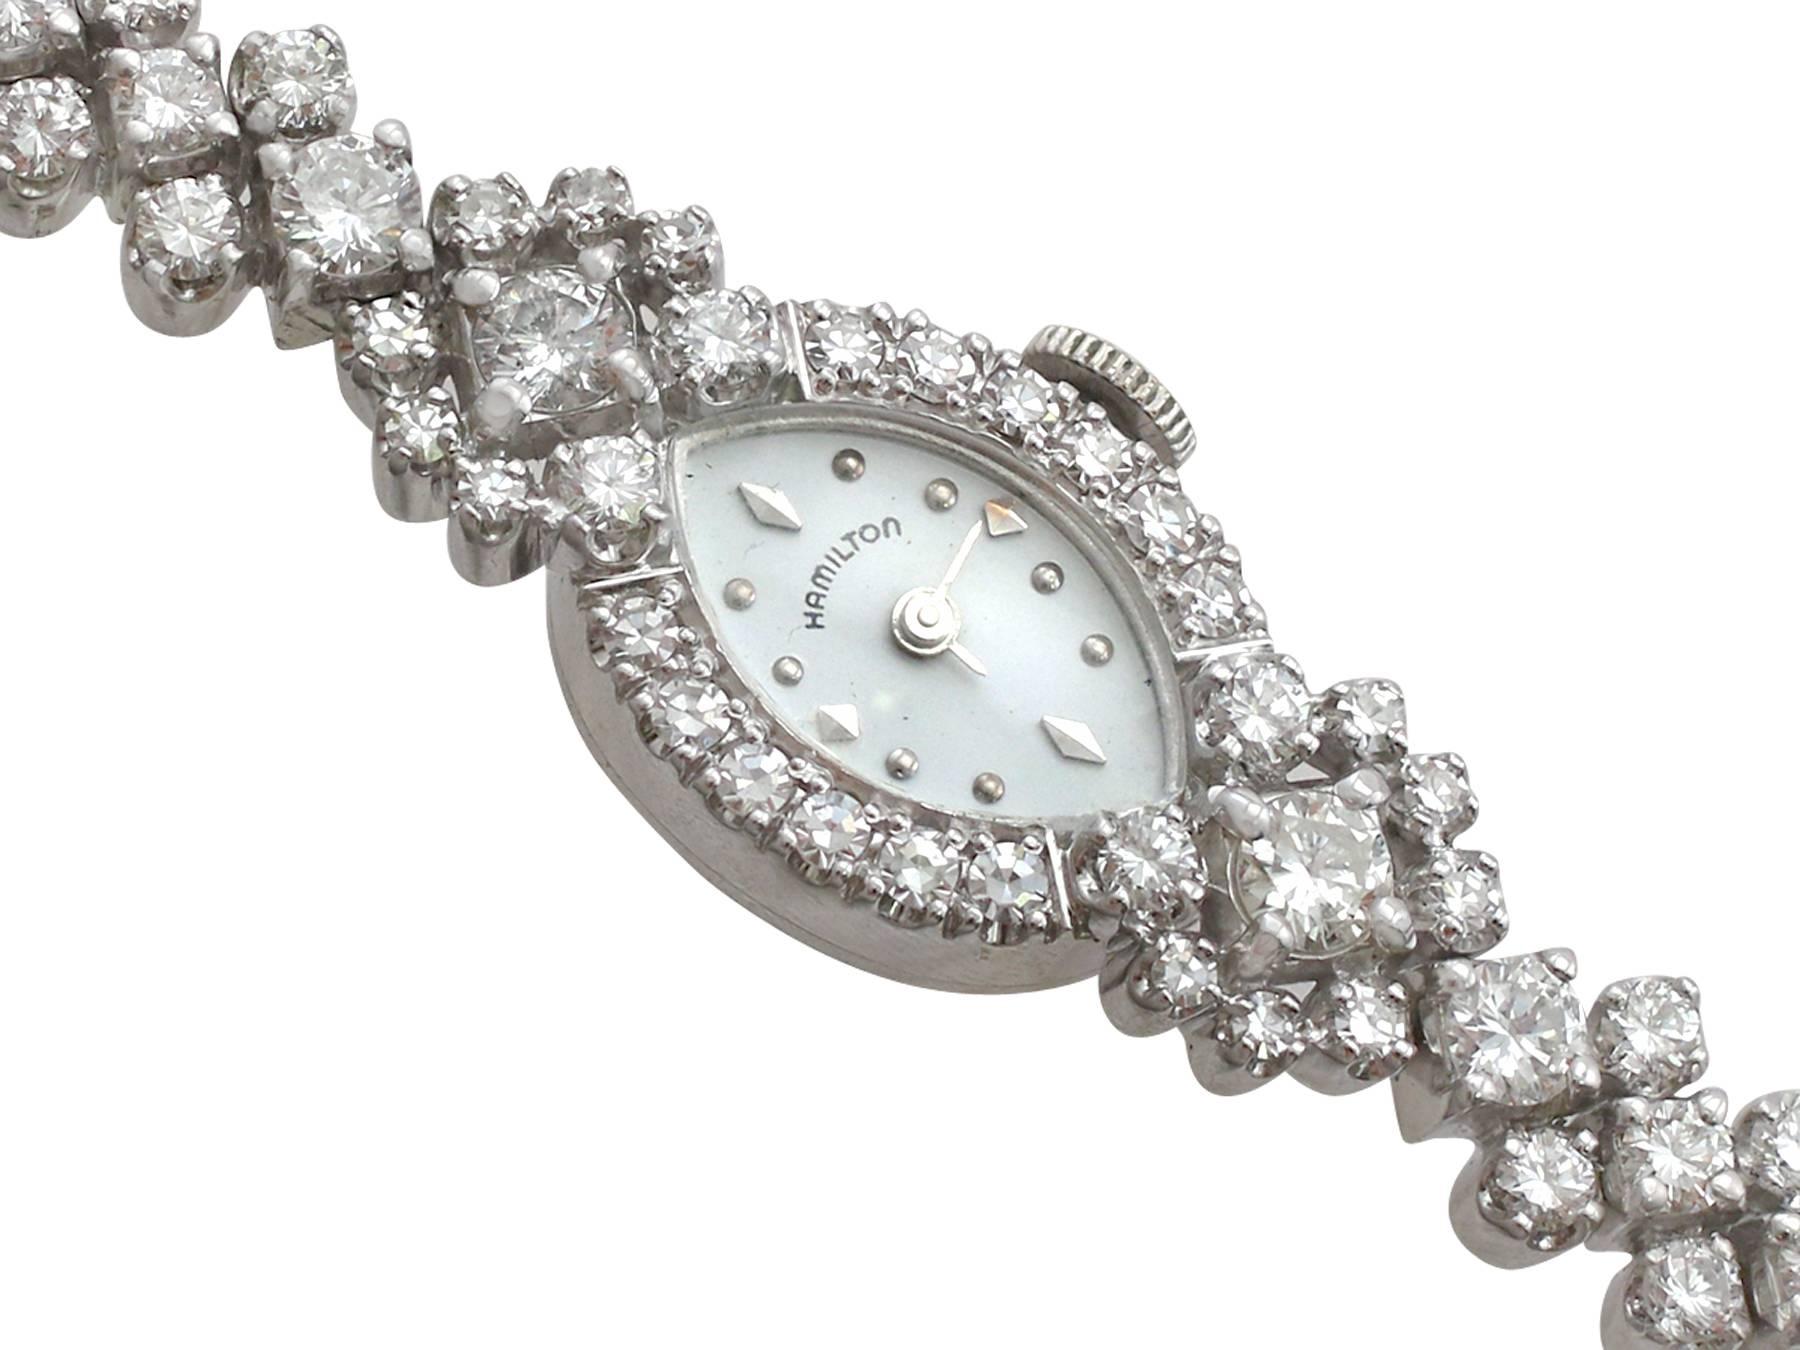 A stunning vintage 1950's 2.06 carat diamond and 14 karat white gold ladies cocktail watch; part of our diverse antique jewellery collections.

This stunning, fine and impressive diamond cocktail watch has been crafted in 14k white gold.

The